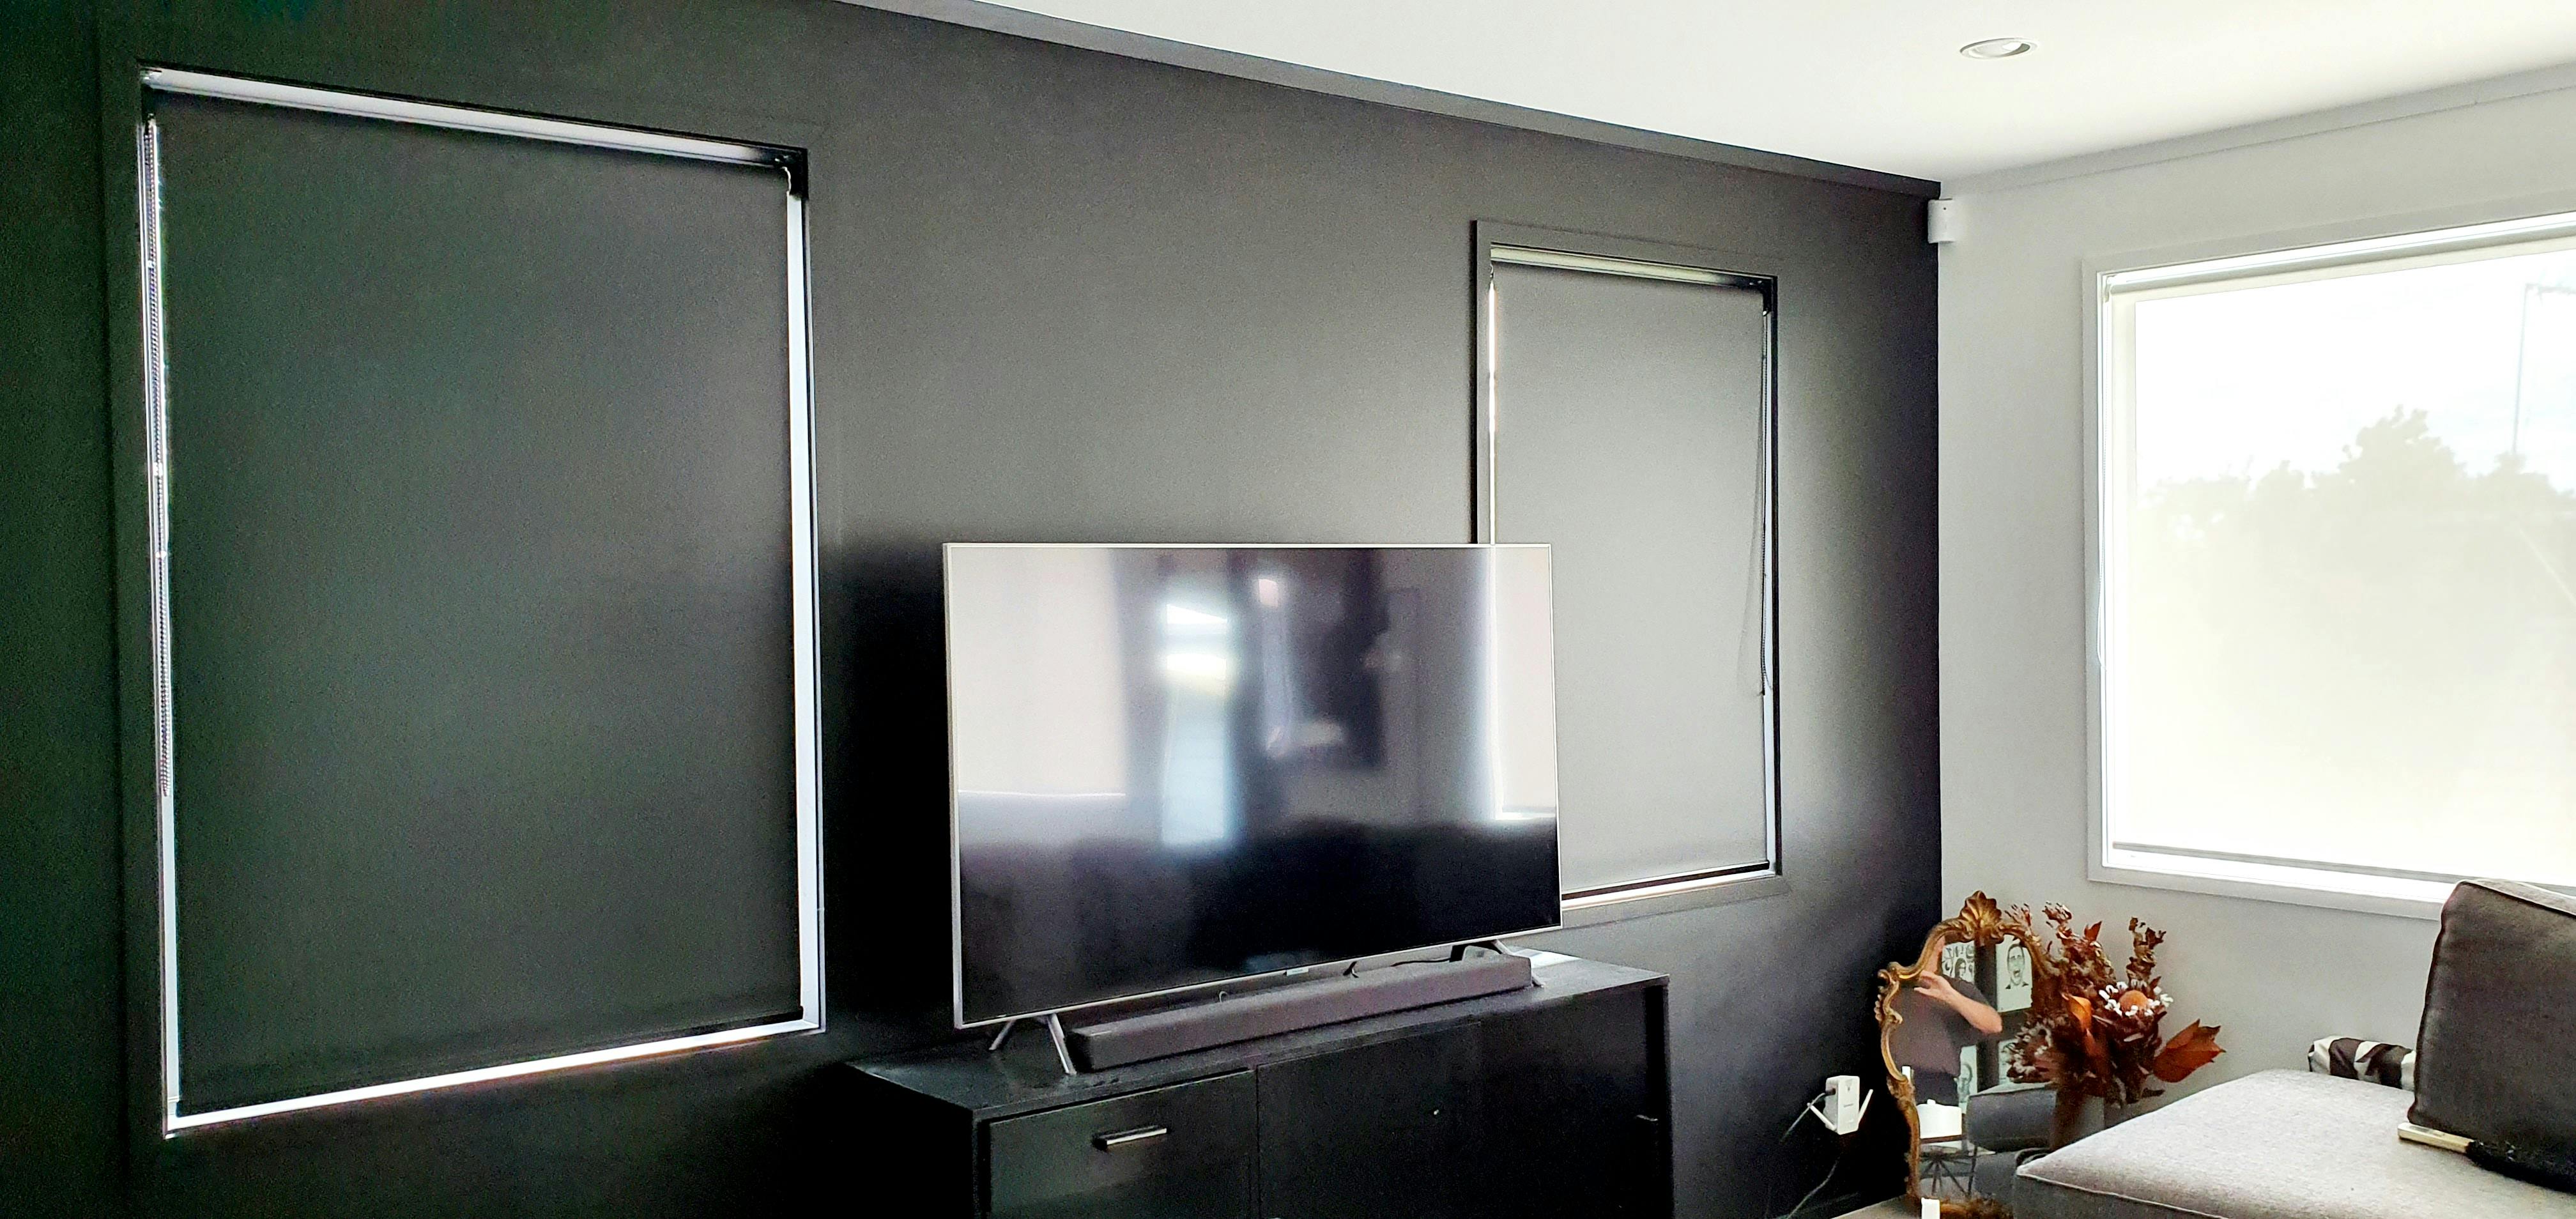 An additional Lounge/tv room with combination of blackout blinds and sunscreen blinds, black and white blind combo.